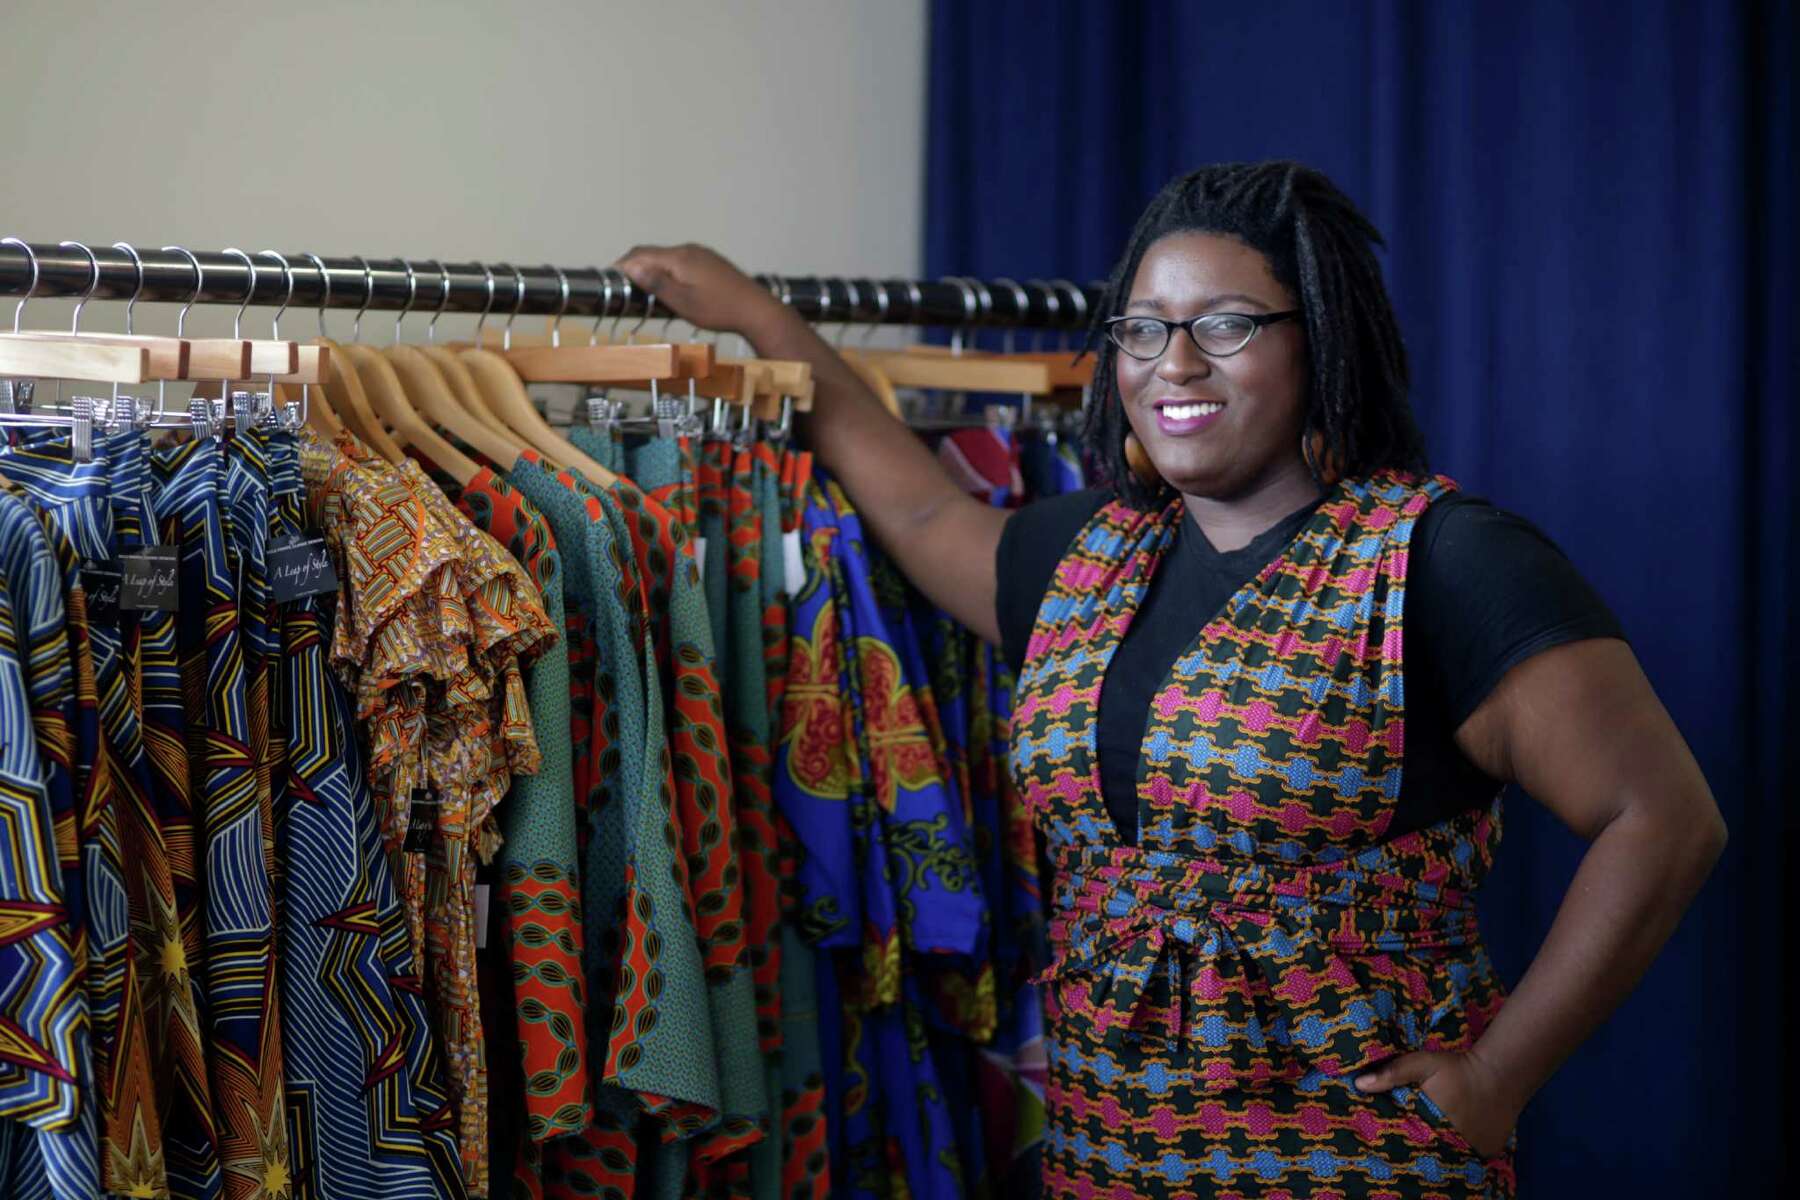 Kvarter Instruere øretelefon Find your perfect outfit at these Black-owned Houston boutiques